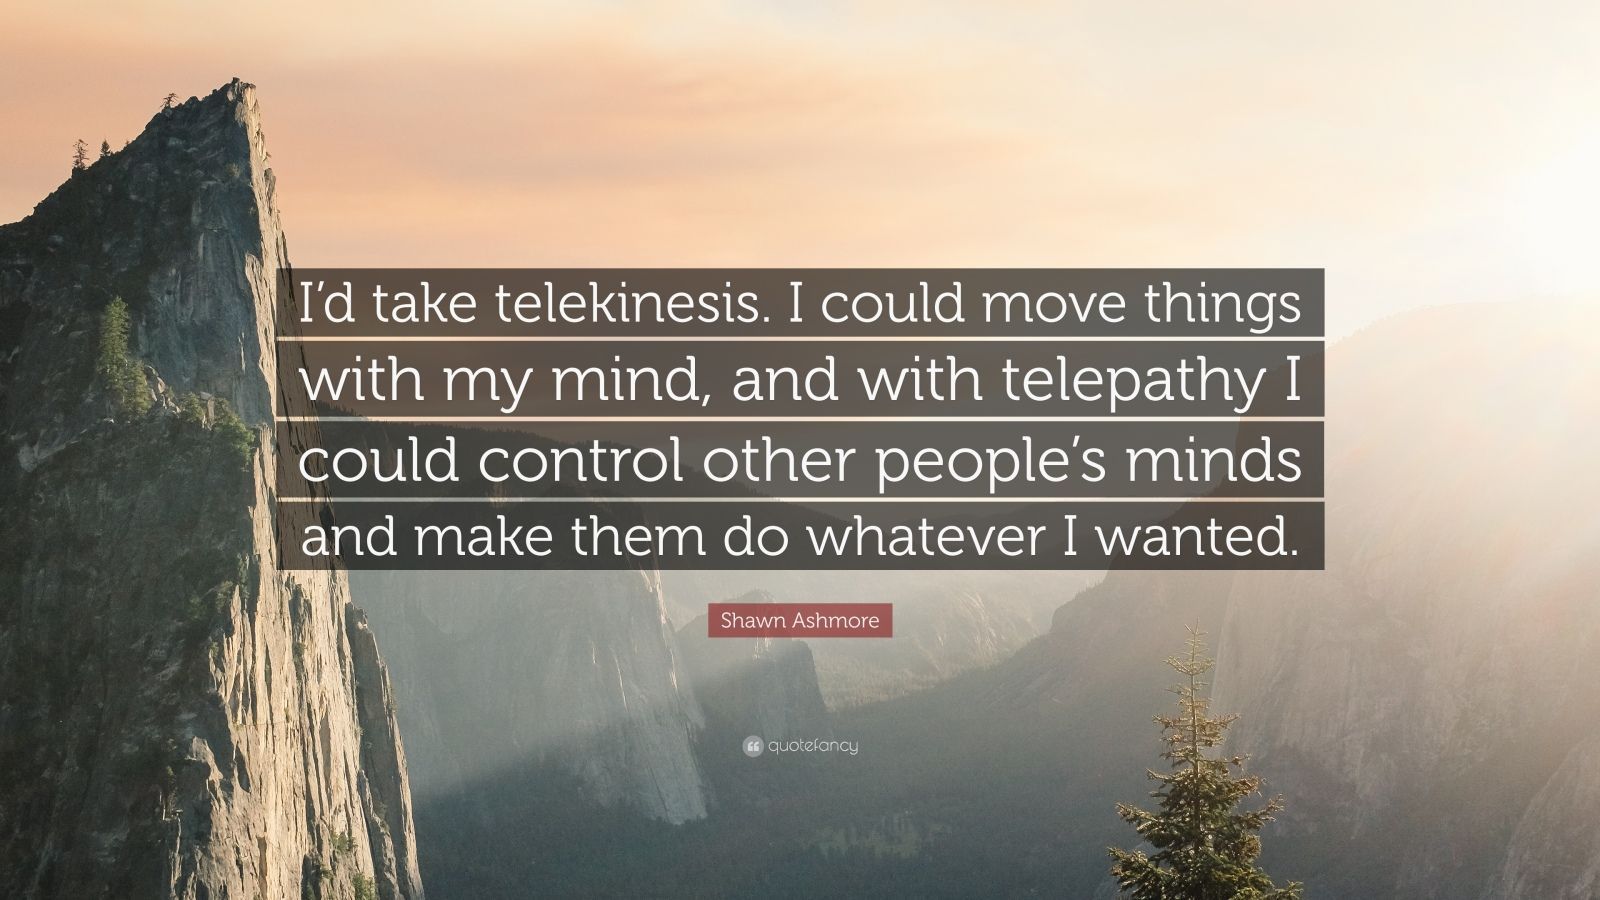 Shawn Ashmore Quote: “I'd take telekinesis. I could move things